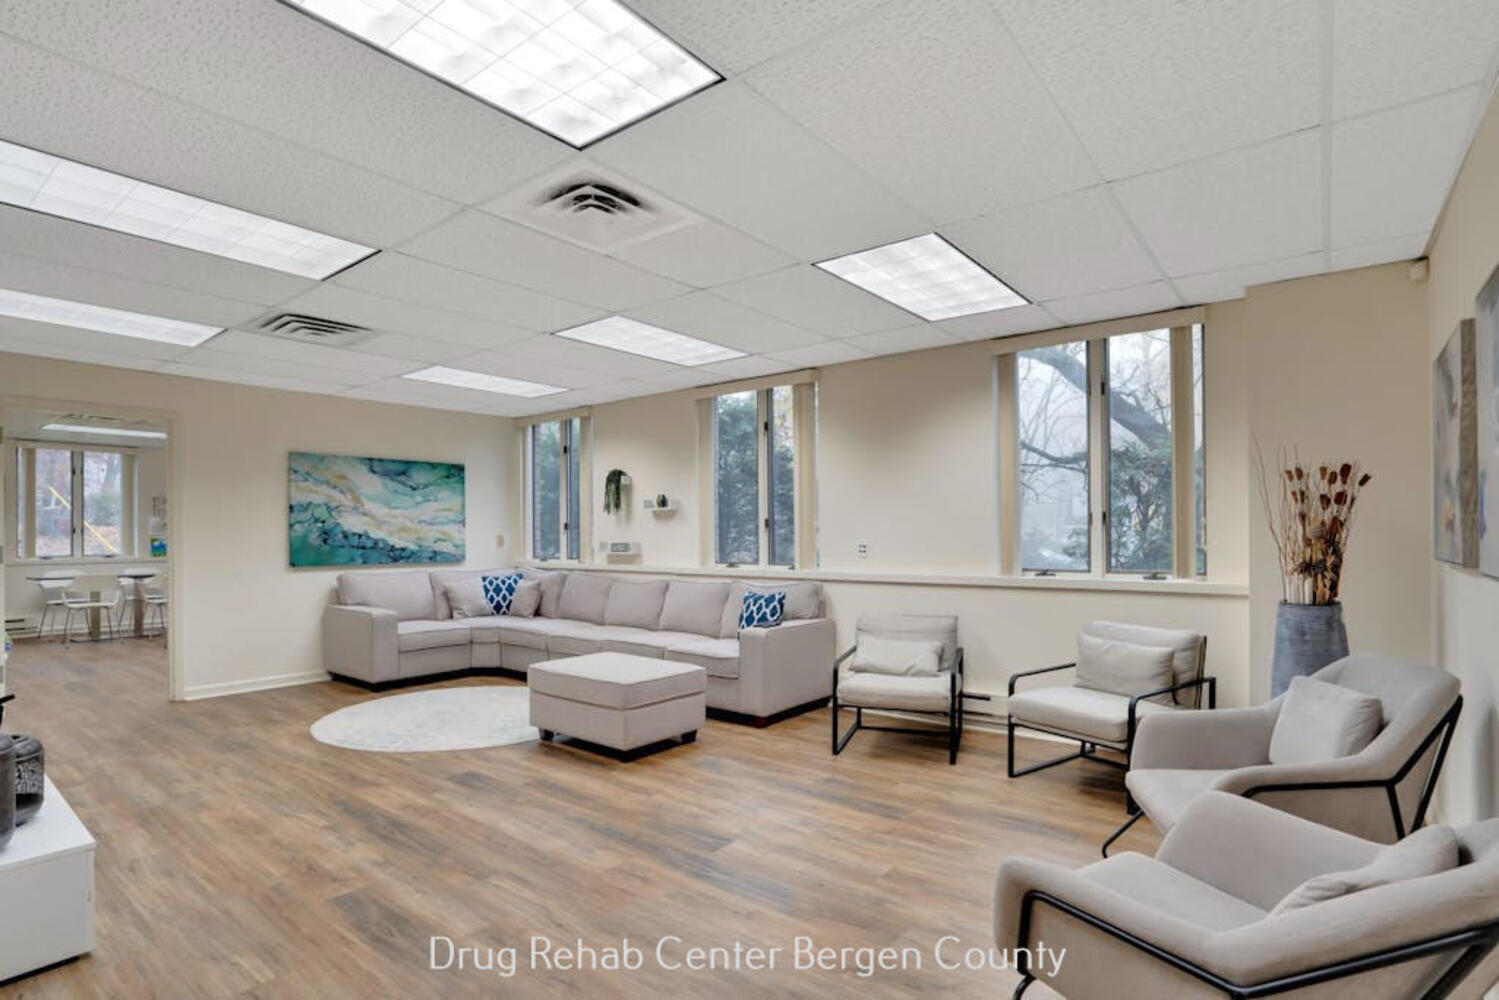 Picture Of Valley Spring REcovery Center, Drug and Alcohol Rehab Center In New Jersey